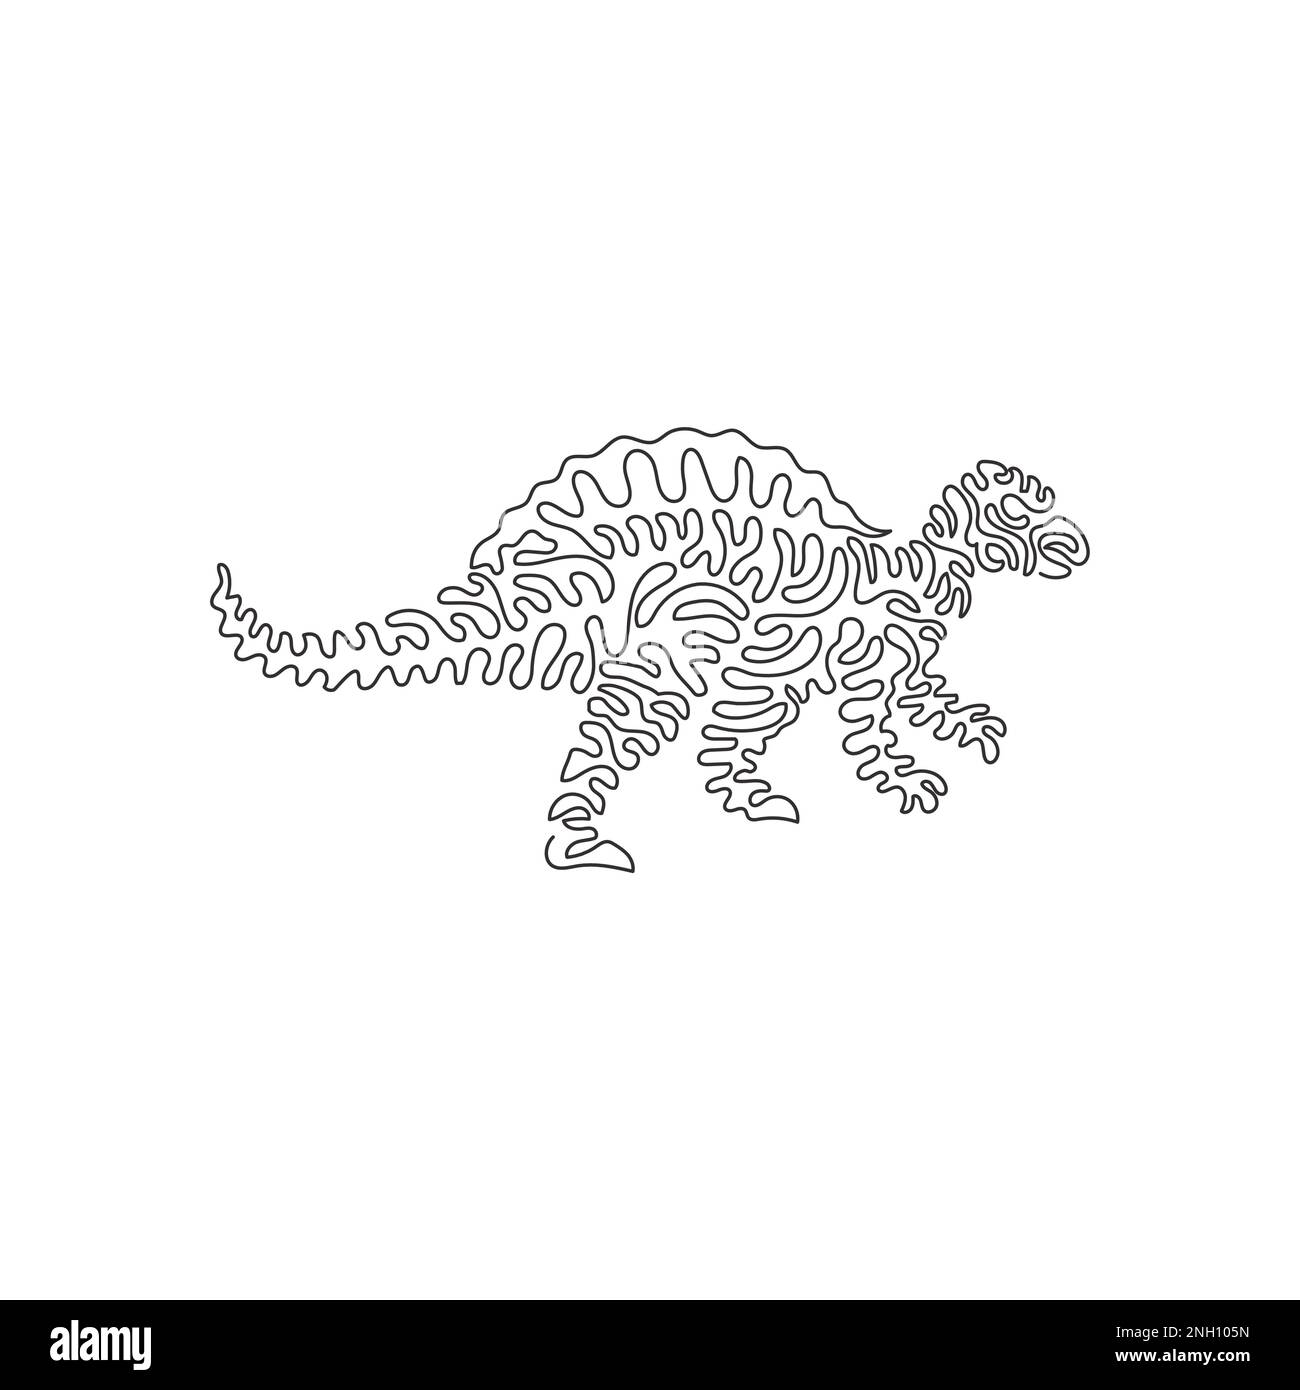 Continuous one line drawing of spine lizard abstract art. Single line editable stroke vector illustration of spinosaurus large carnivores Stock Vector